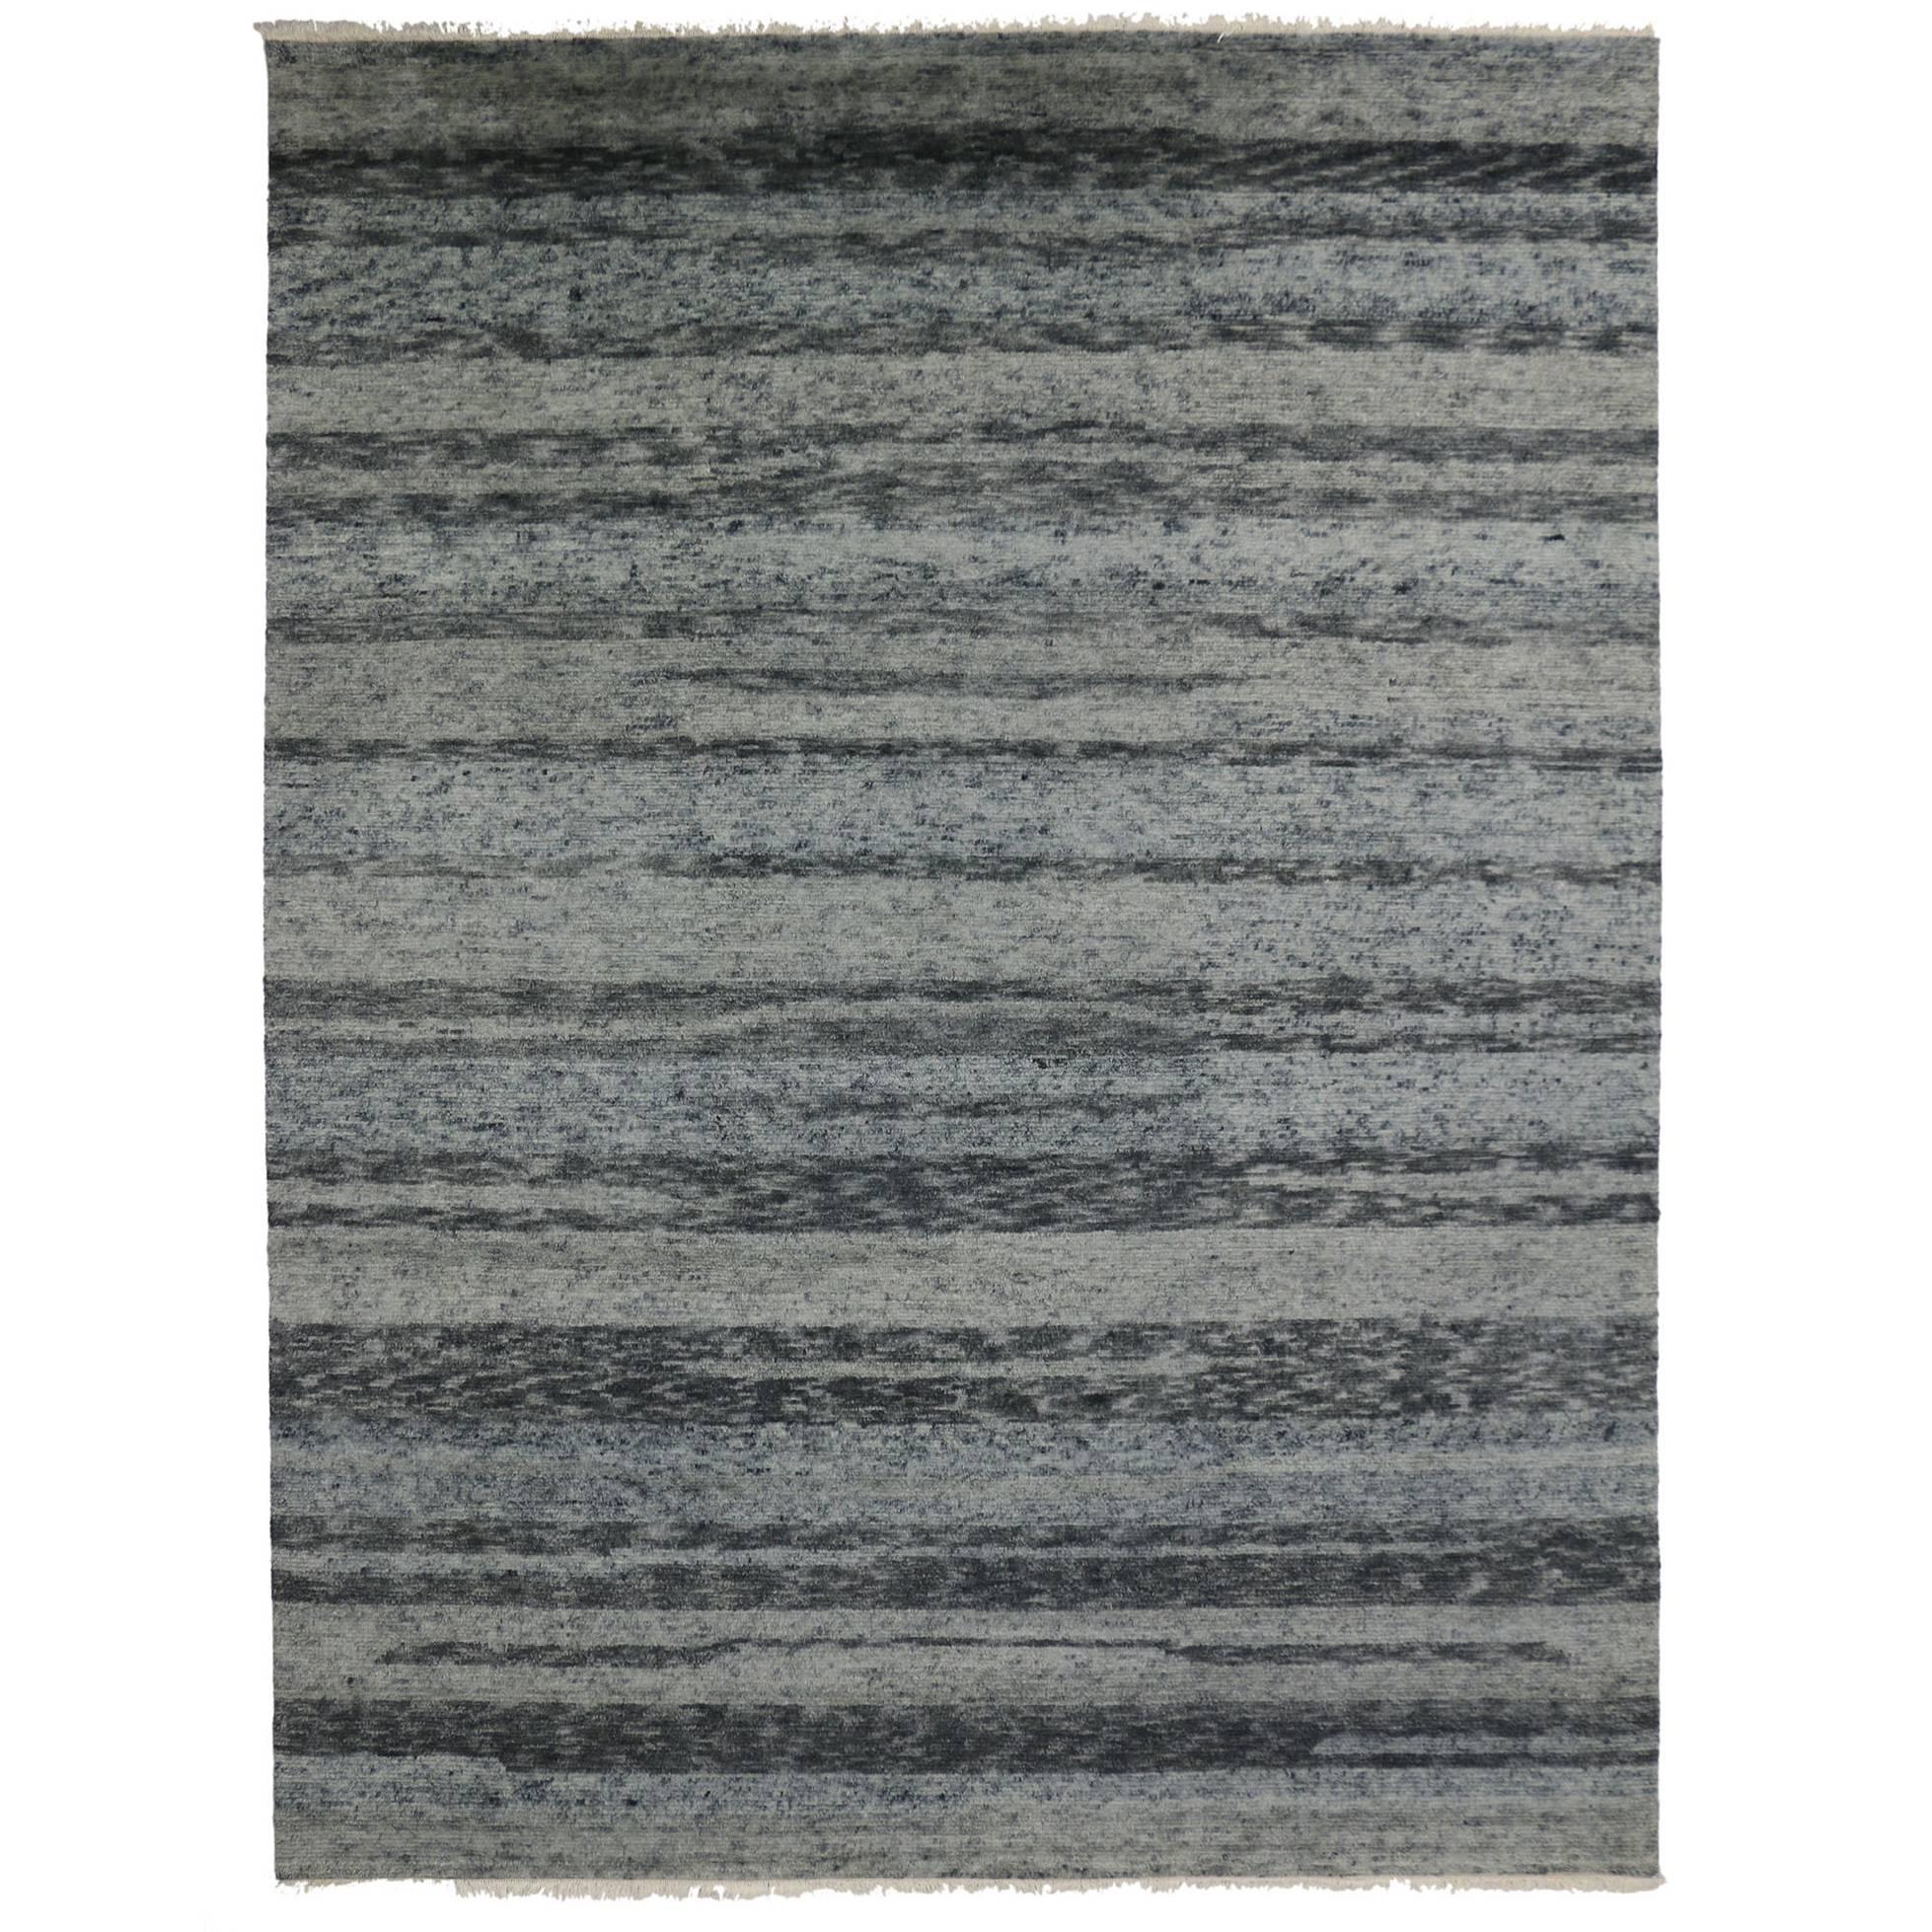 Contemporary Moroccan Gray Rug with New Nordic Hygge Vibes and Bauhaus Style